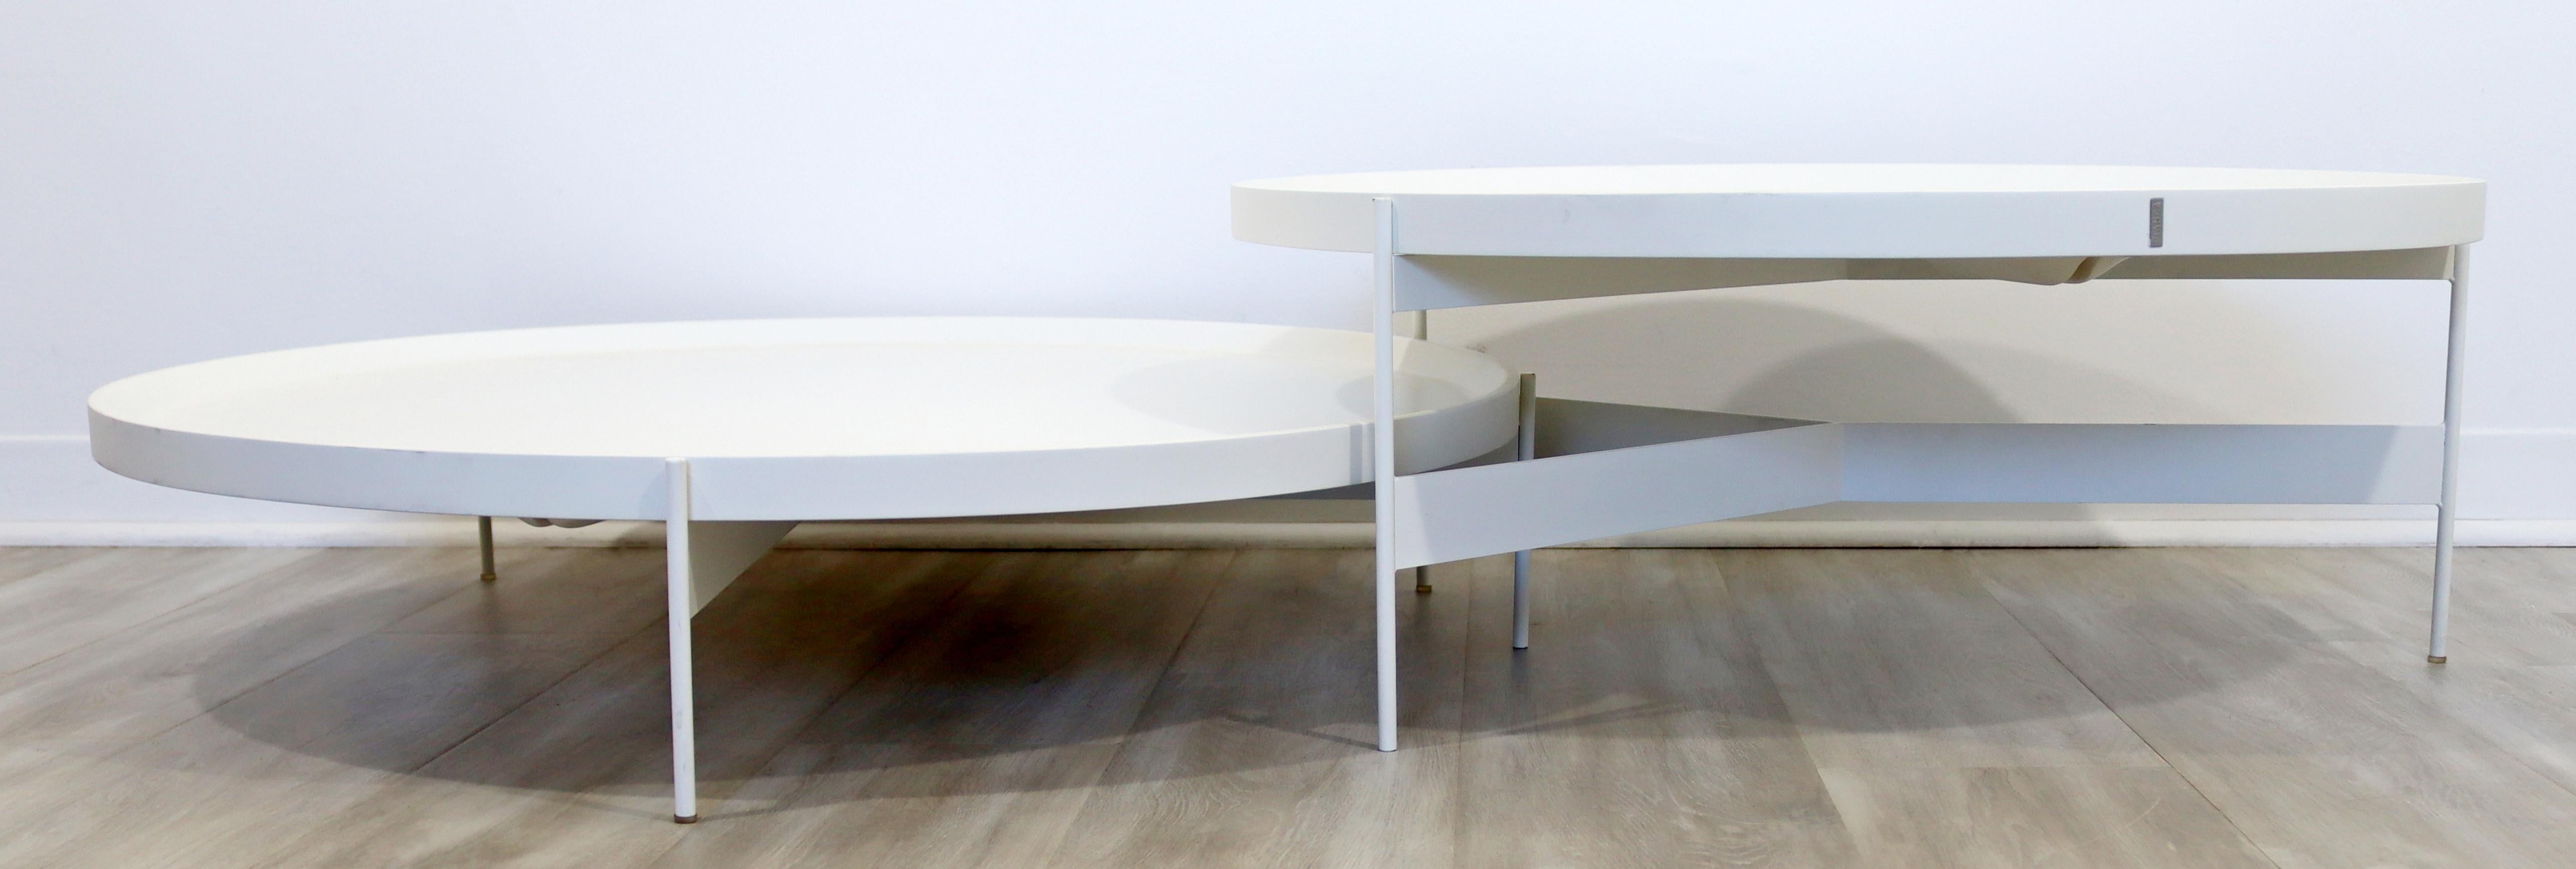 For your consideration is a fantastic pair of Abaco white lacquer side or coffee tables, made in Italy by Pianca. In very good condition. The dimensions are 30